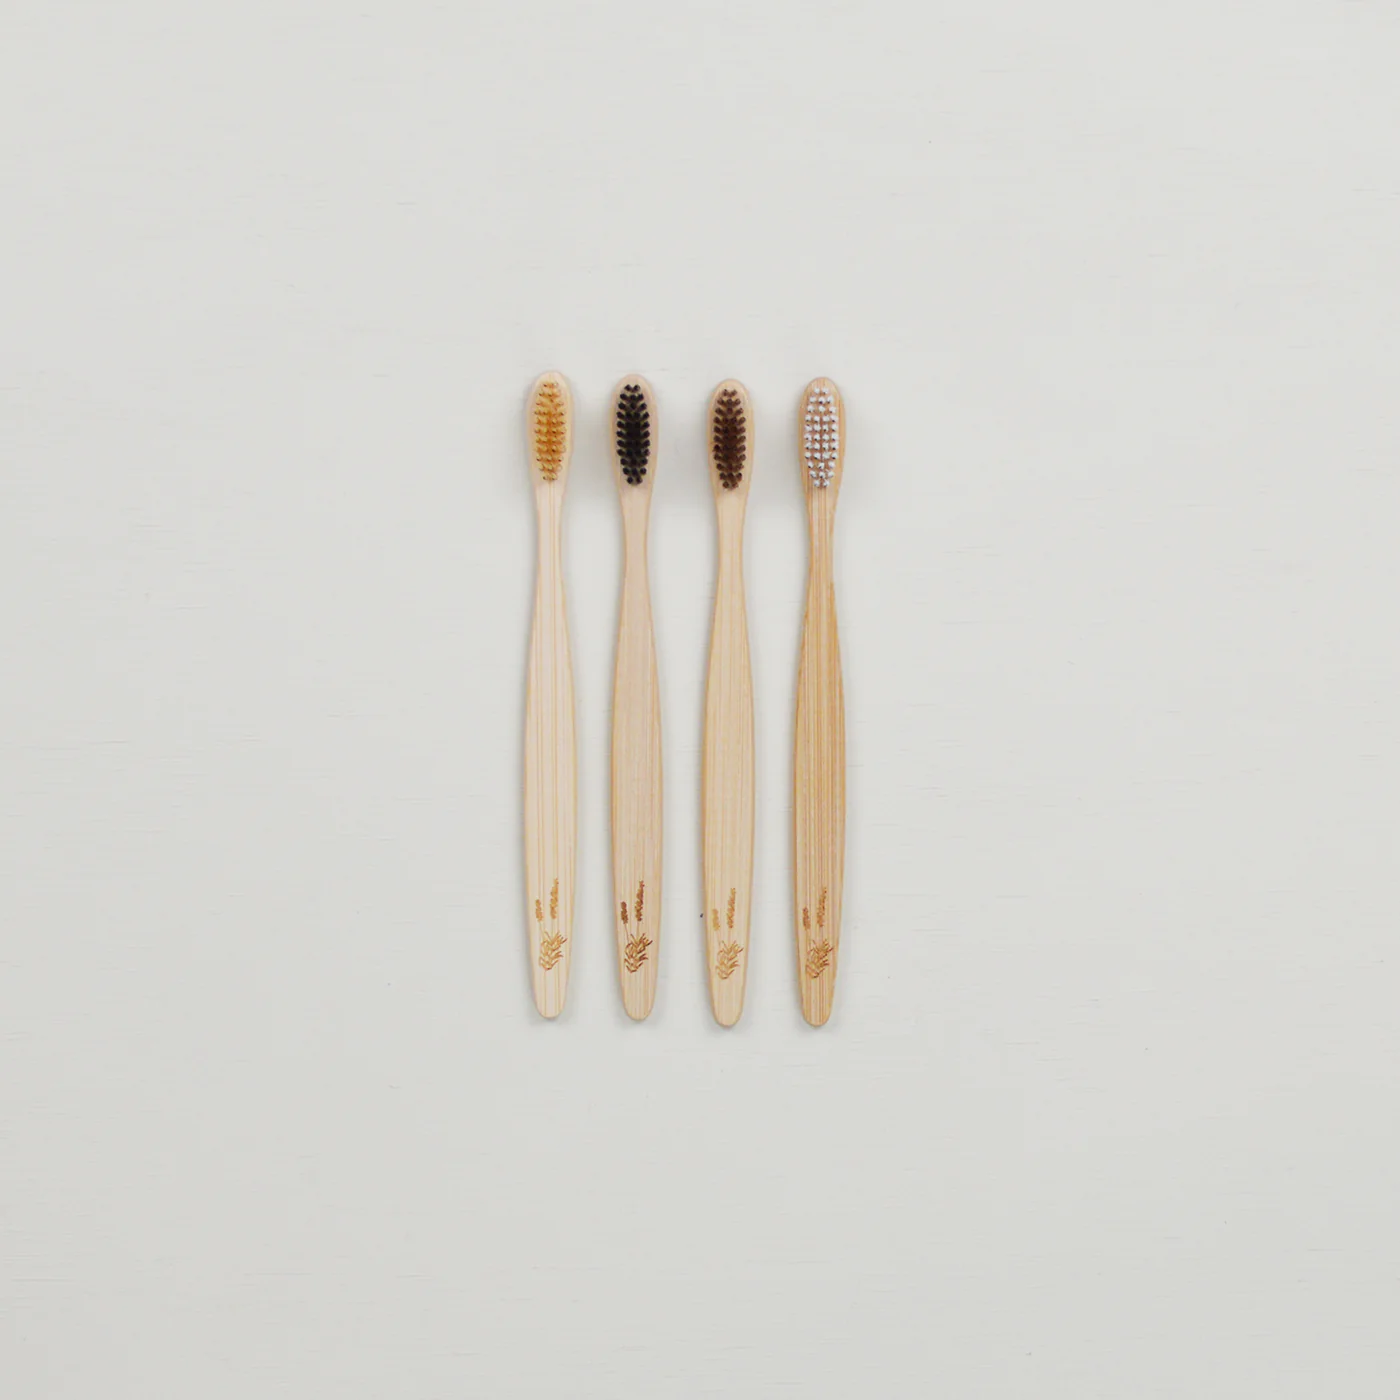 The Conscious Store - Adult Bamboo Toothbrushes (set of 4)